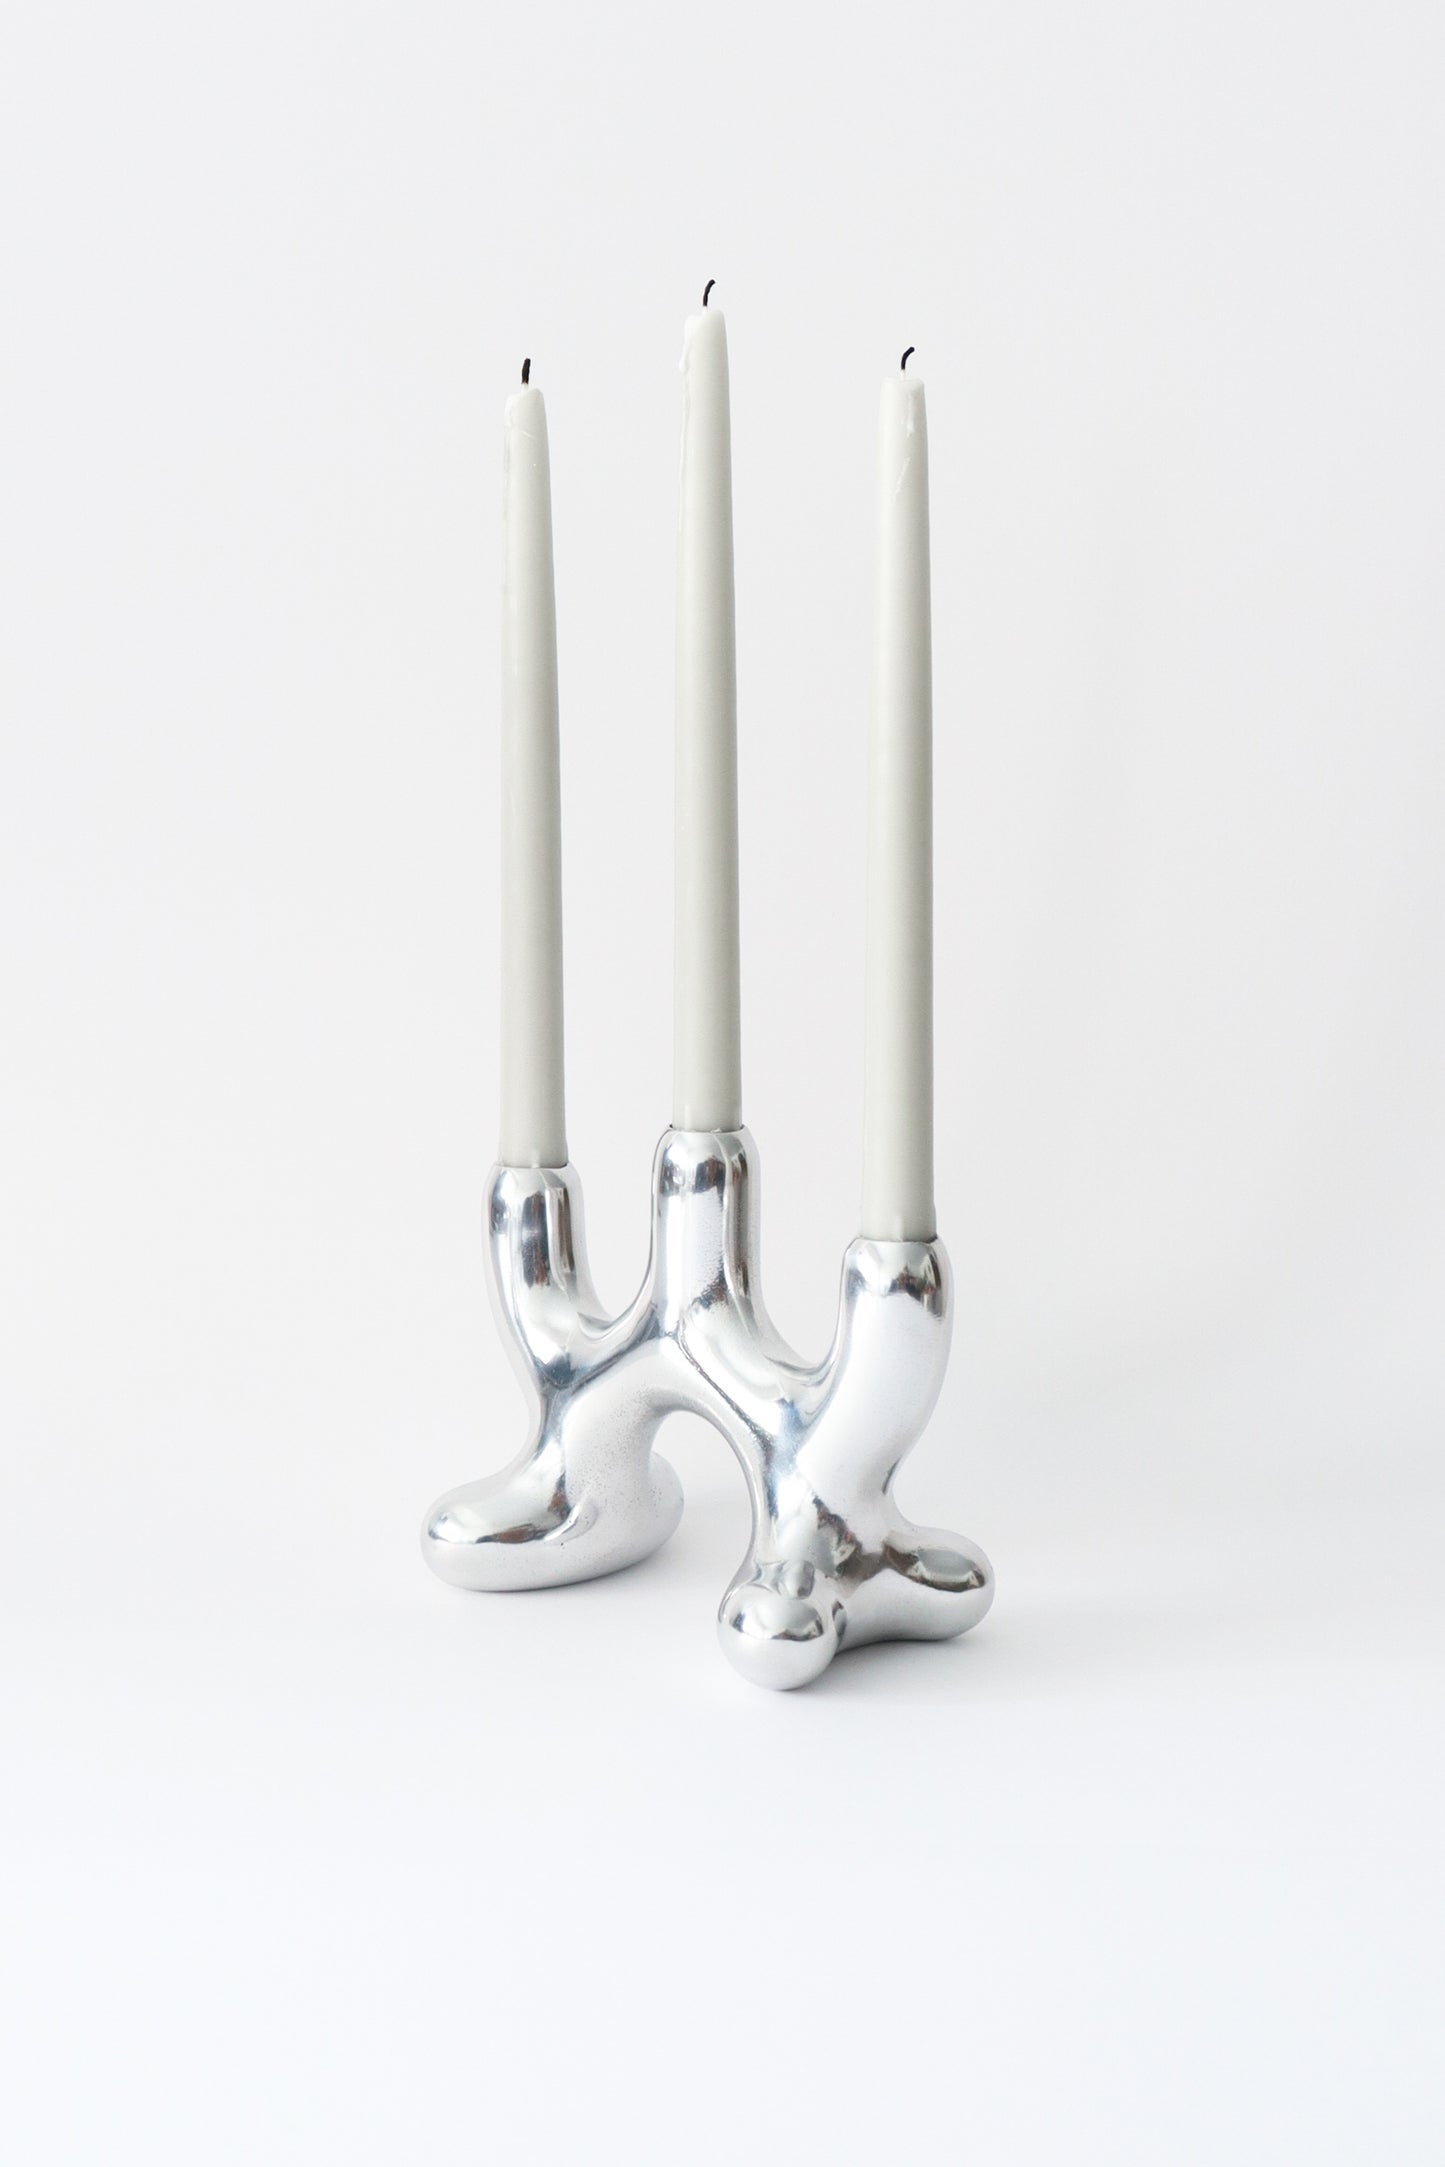 FL-amy 3.4 candle holder